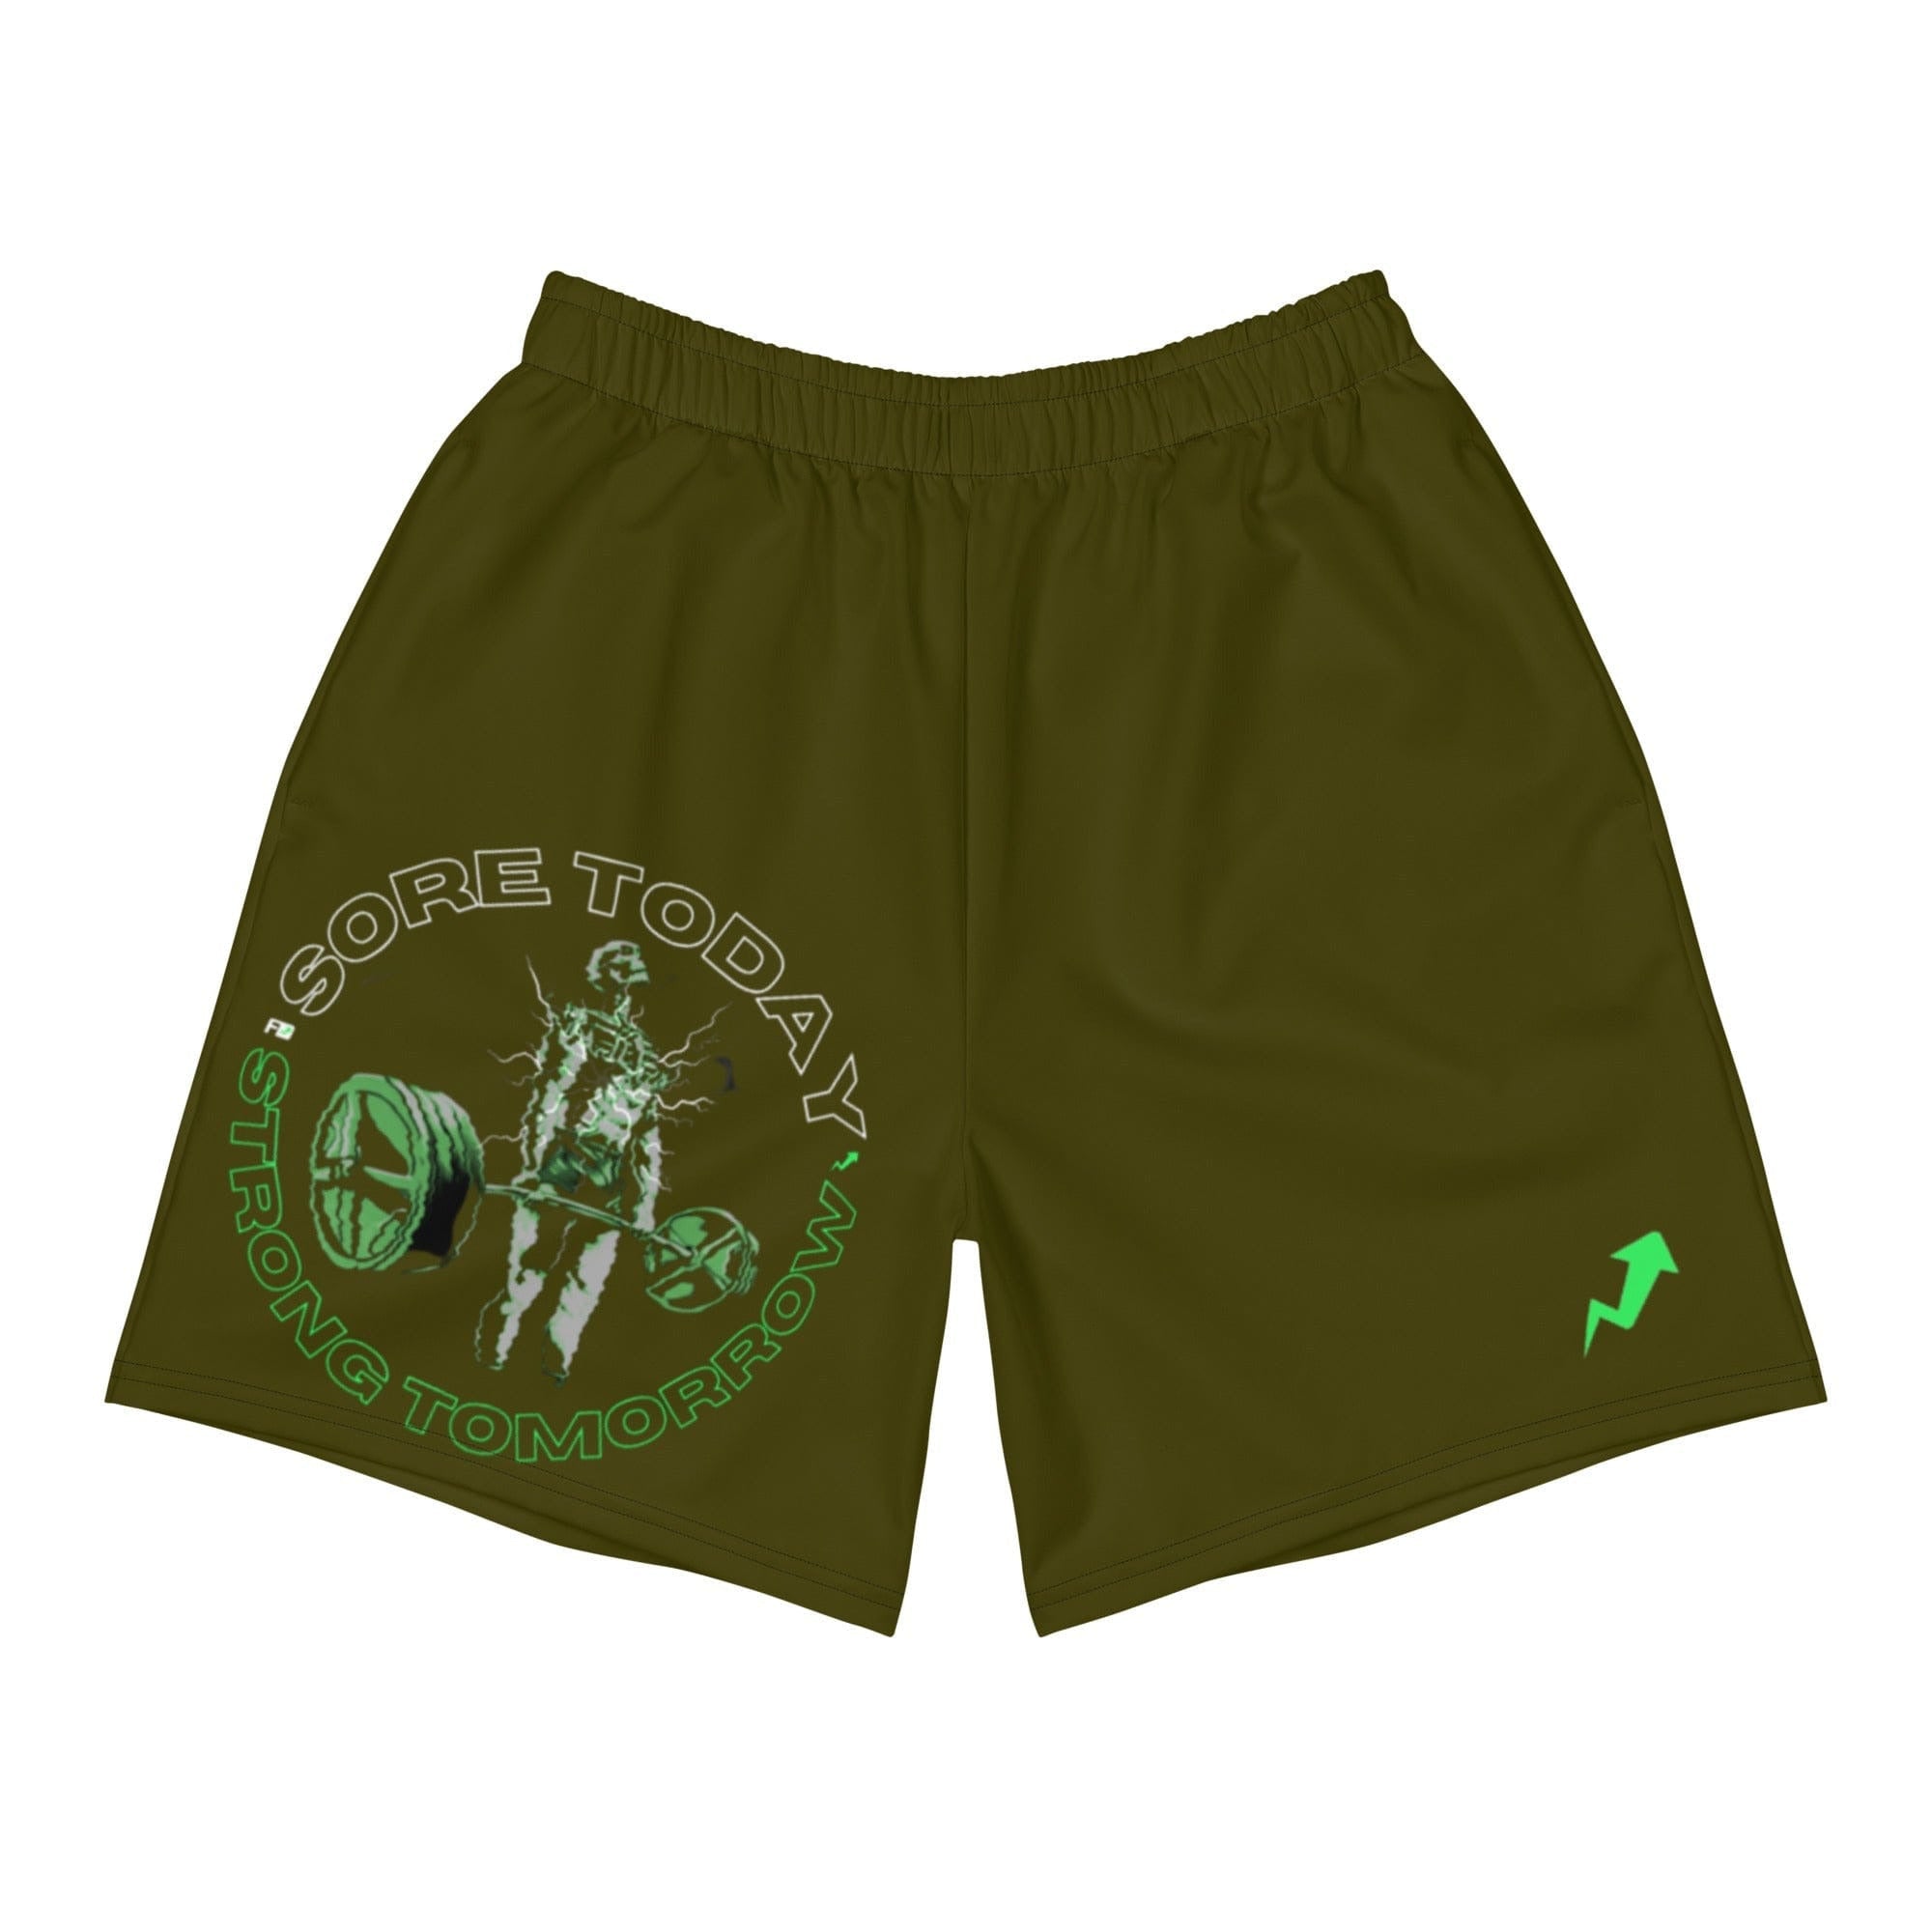 SORE TODAY SHORTS (MILITARY GREEN)